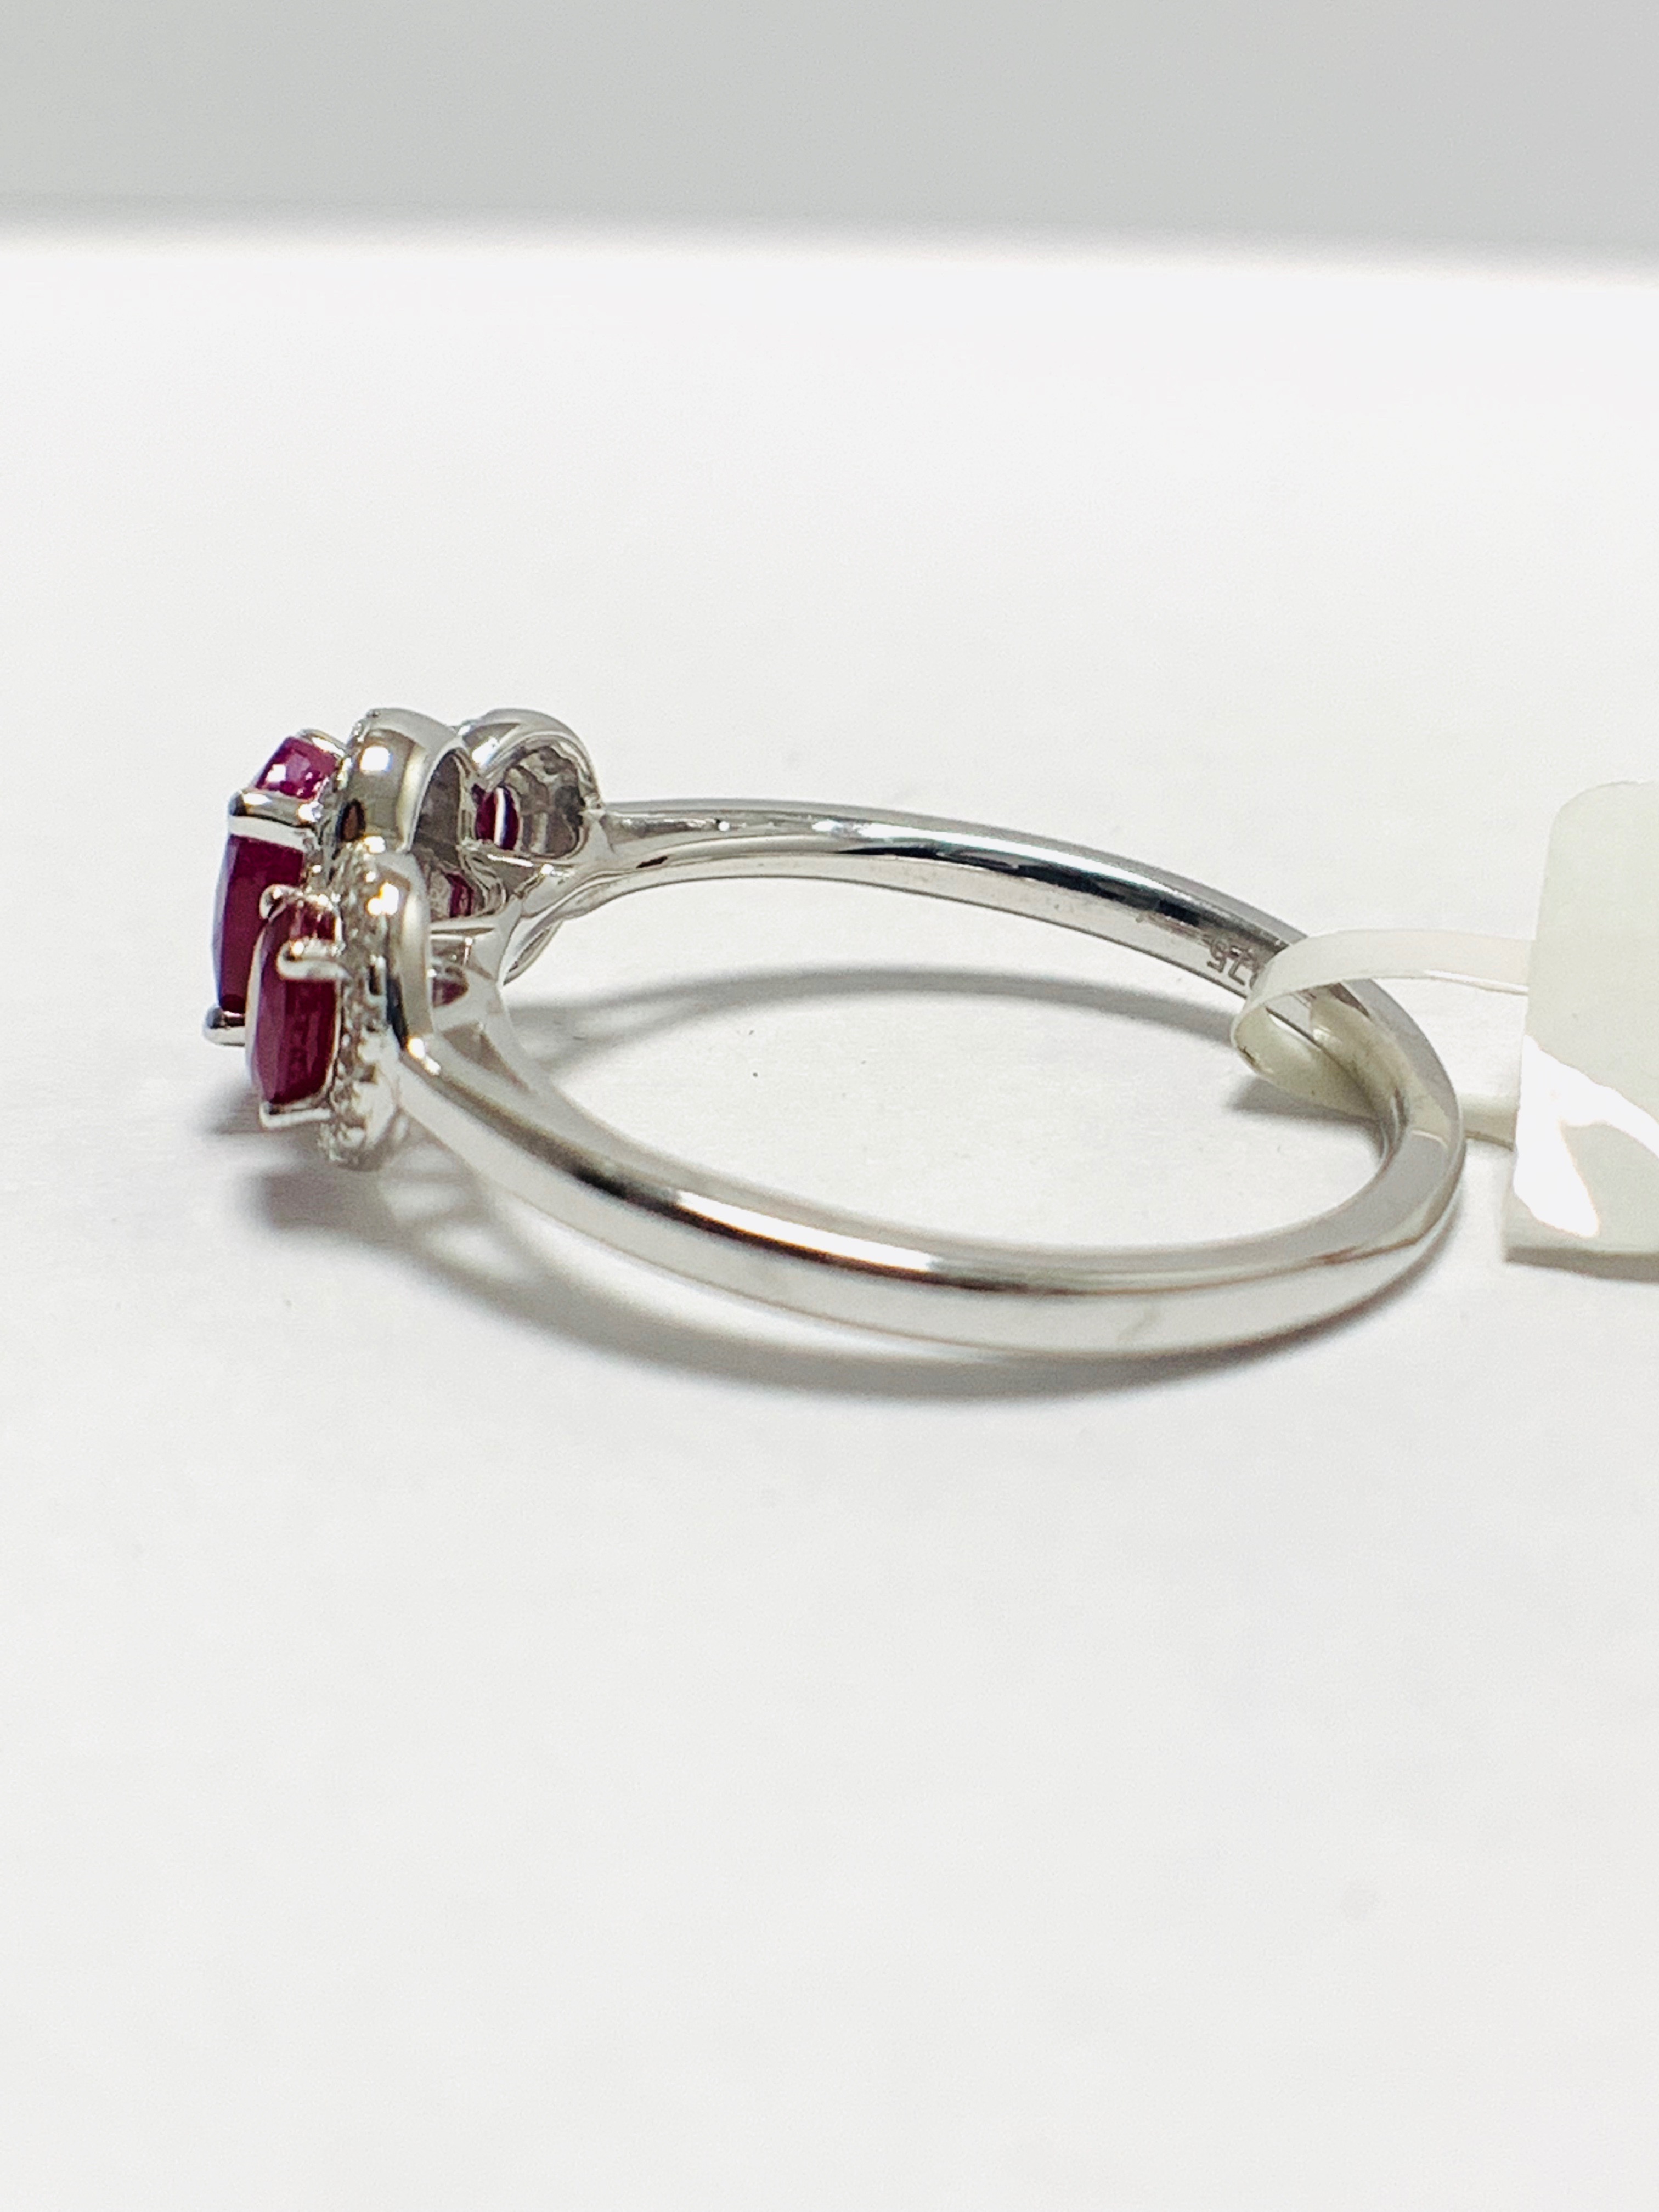 9ct white Gold Ruby trilogy style ring - Image 3 of 8